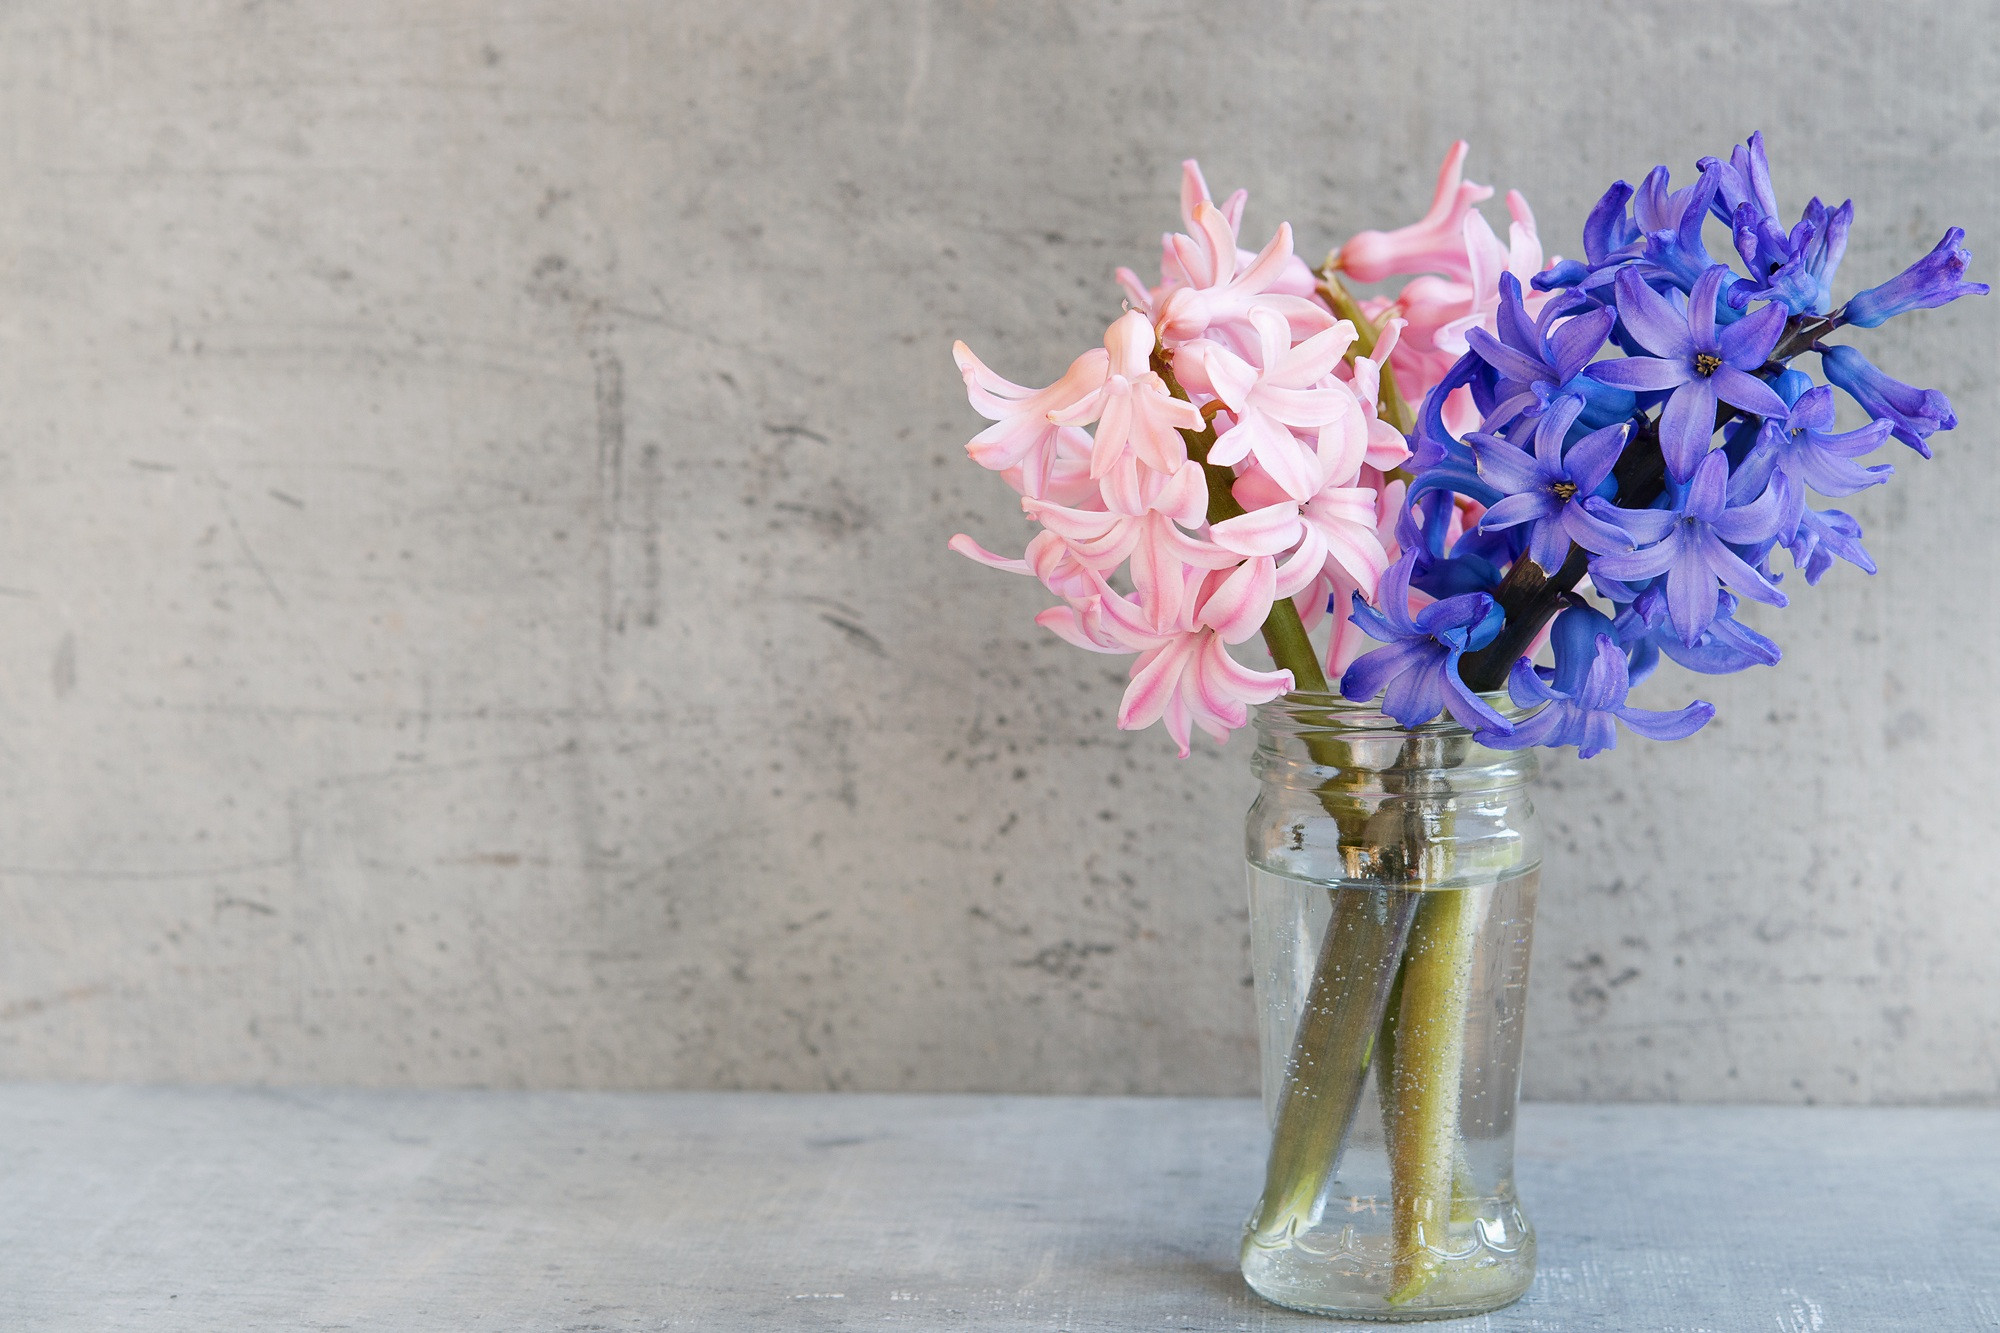 purple glass vase of free images glass vase blue pink close deco negative space in free images glass vase blue pink close deco negative space art floristry hyacinth spring flowers text freedom flowering plant flower bouquet